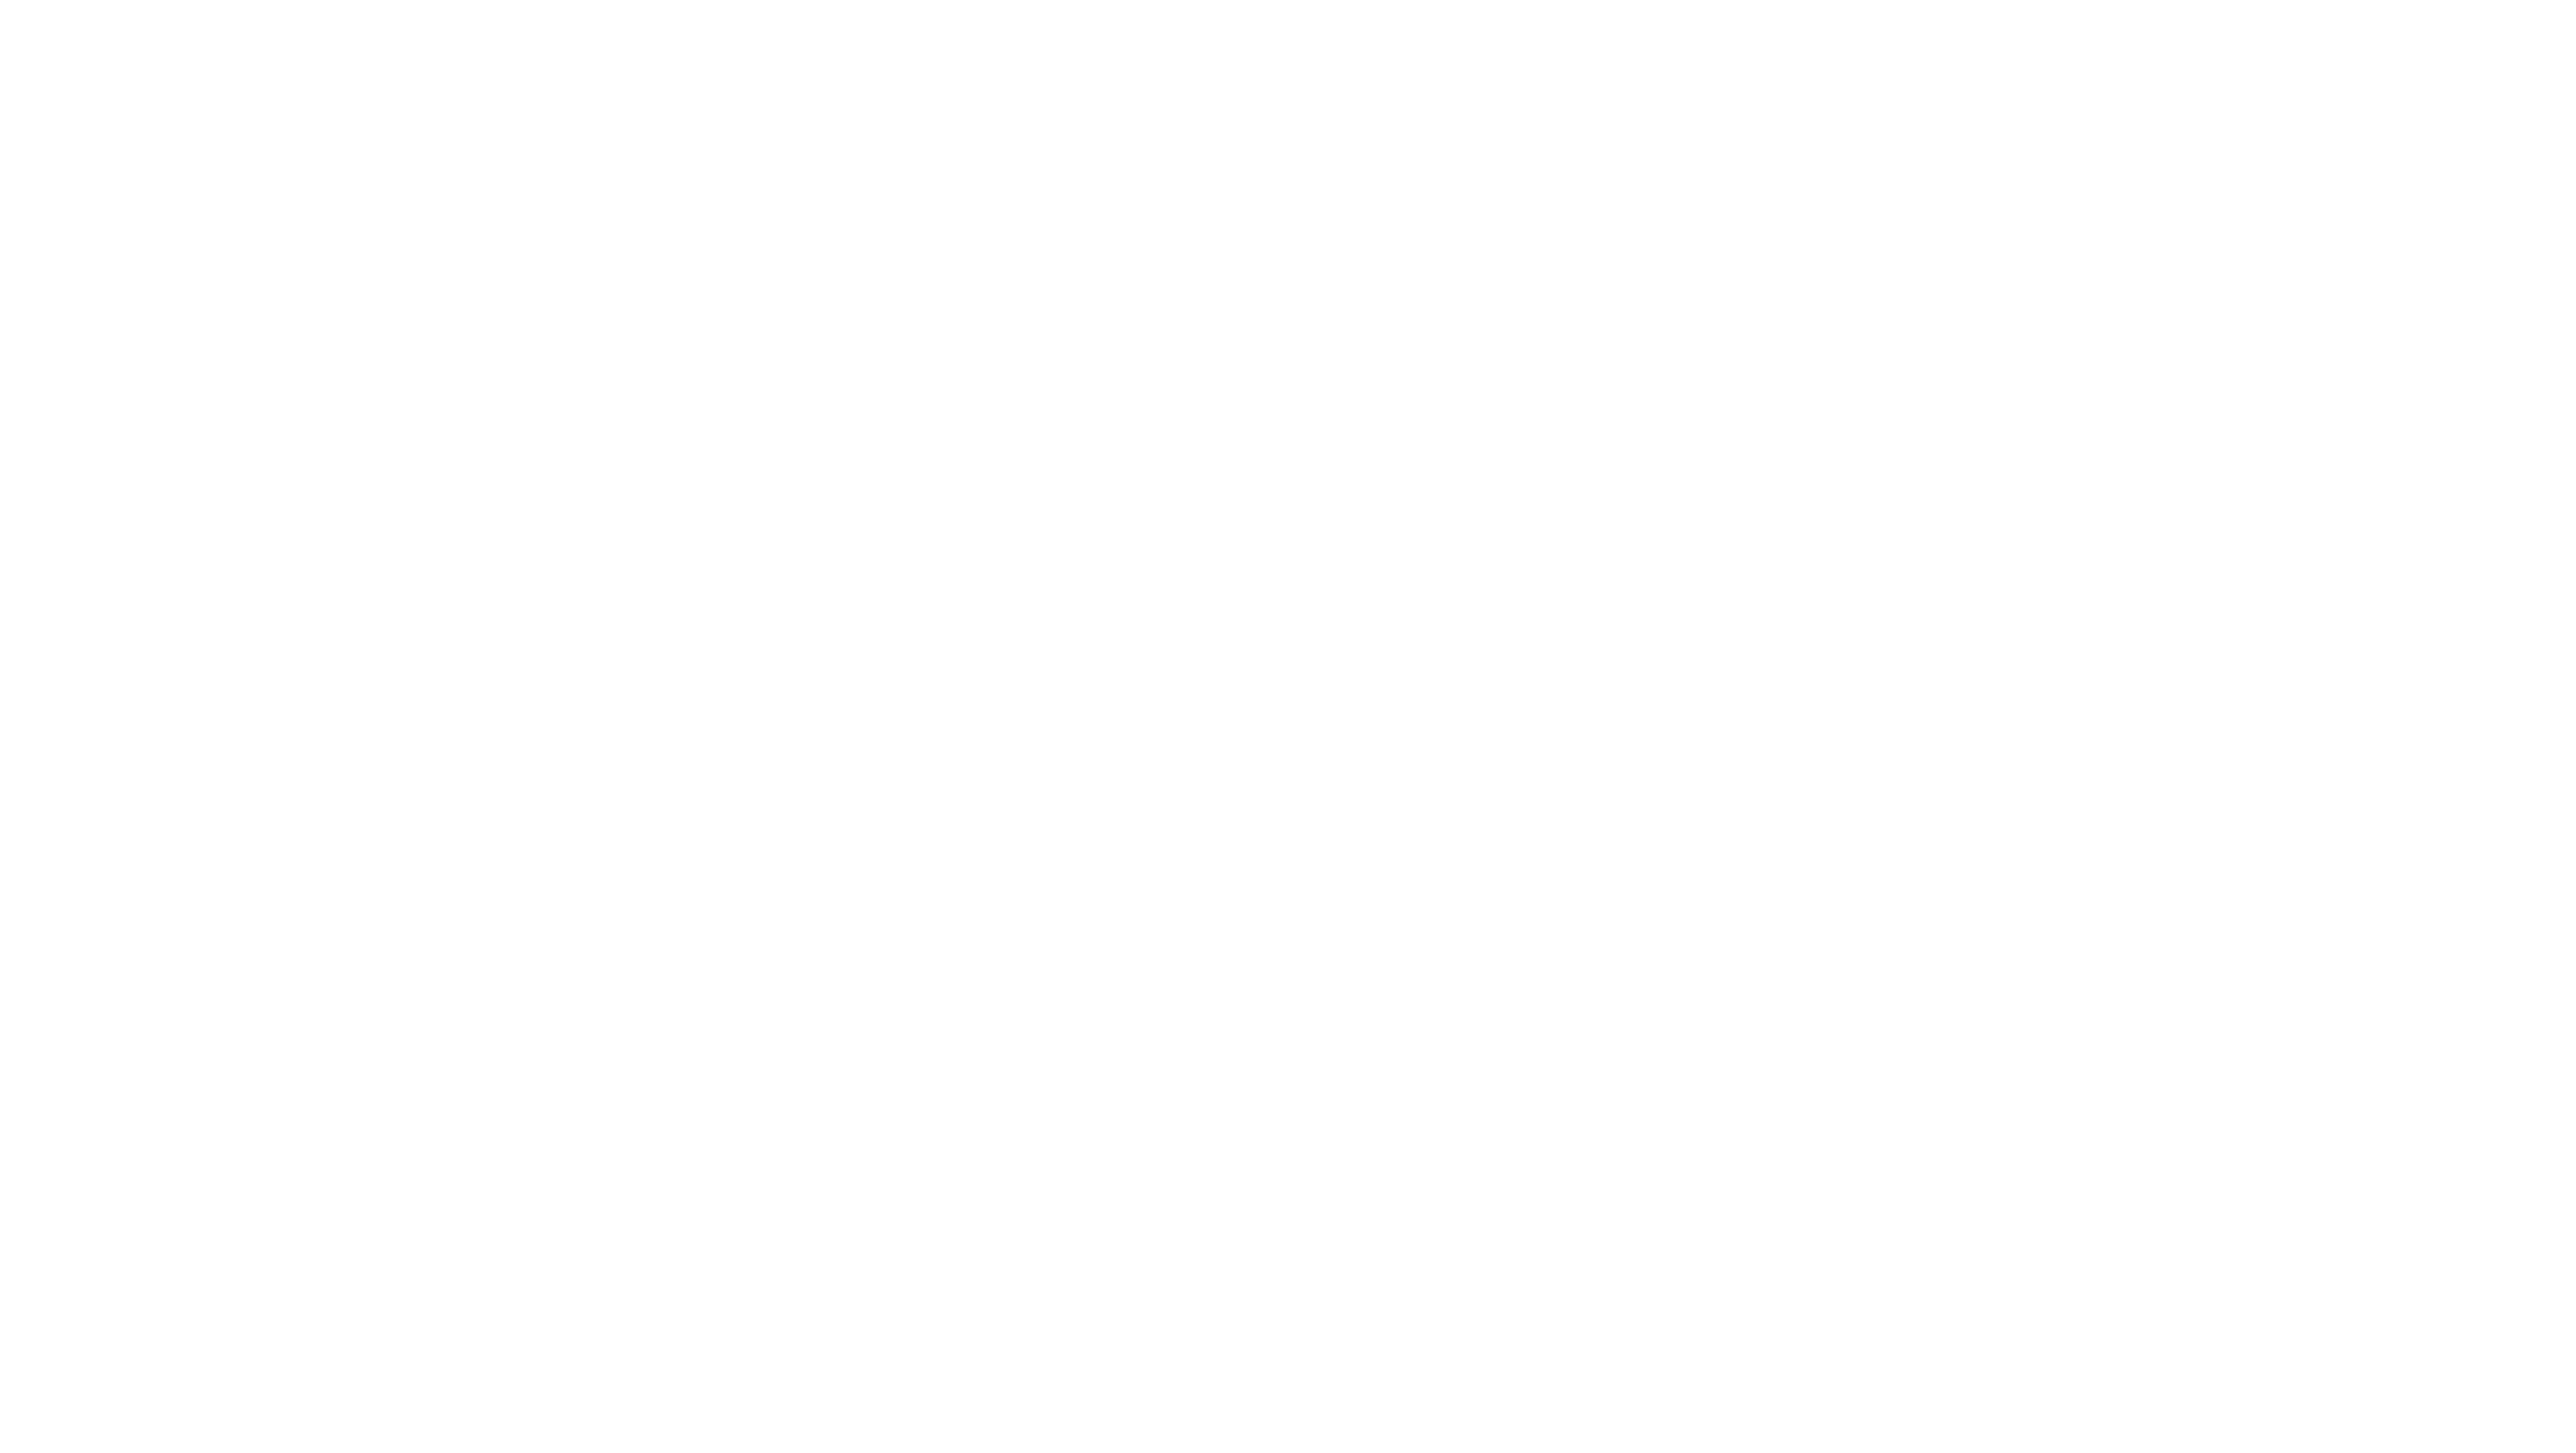 A black and white sign with white text on it, possibly related to Ines Resort Ibiza and 12. 18. Inve